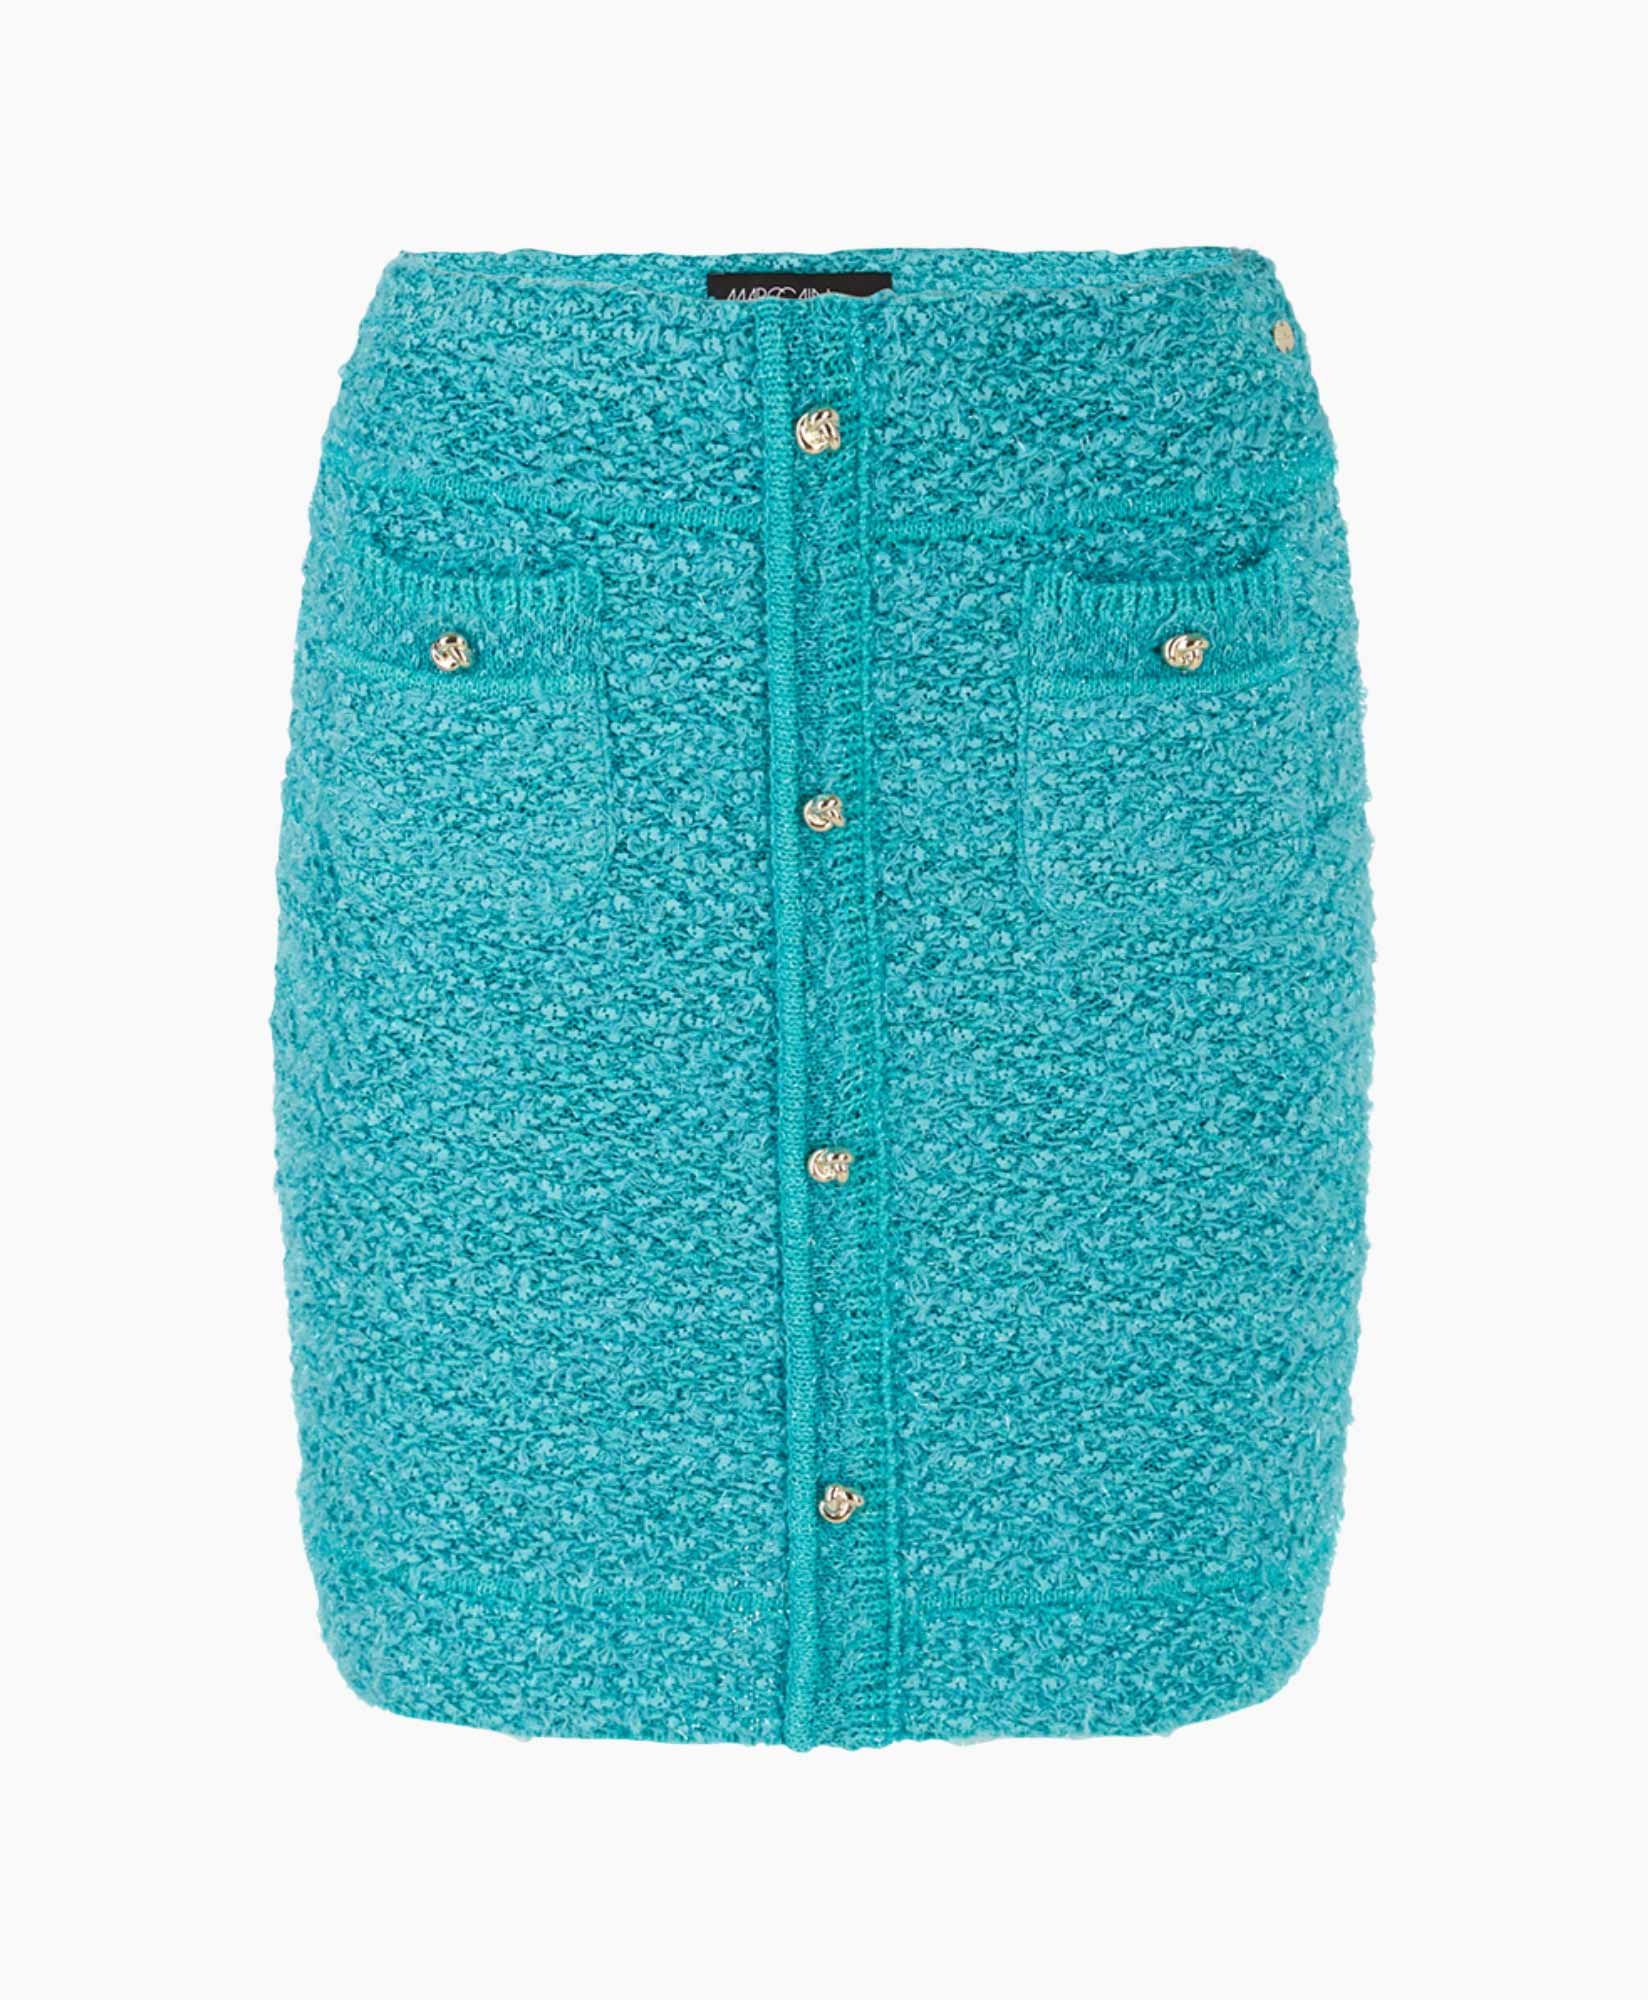 Rok Wc 71.01 M01 turquoise